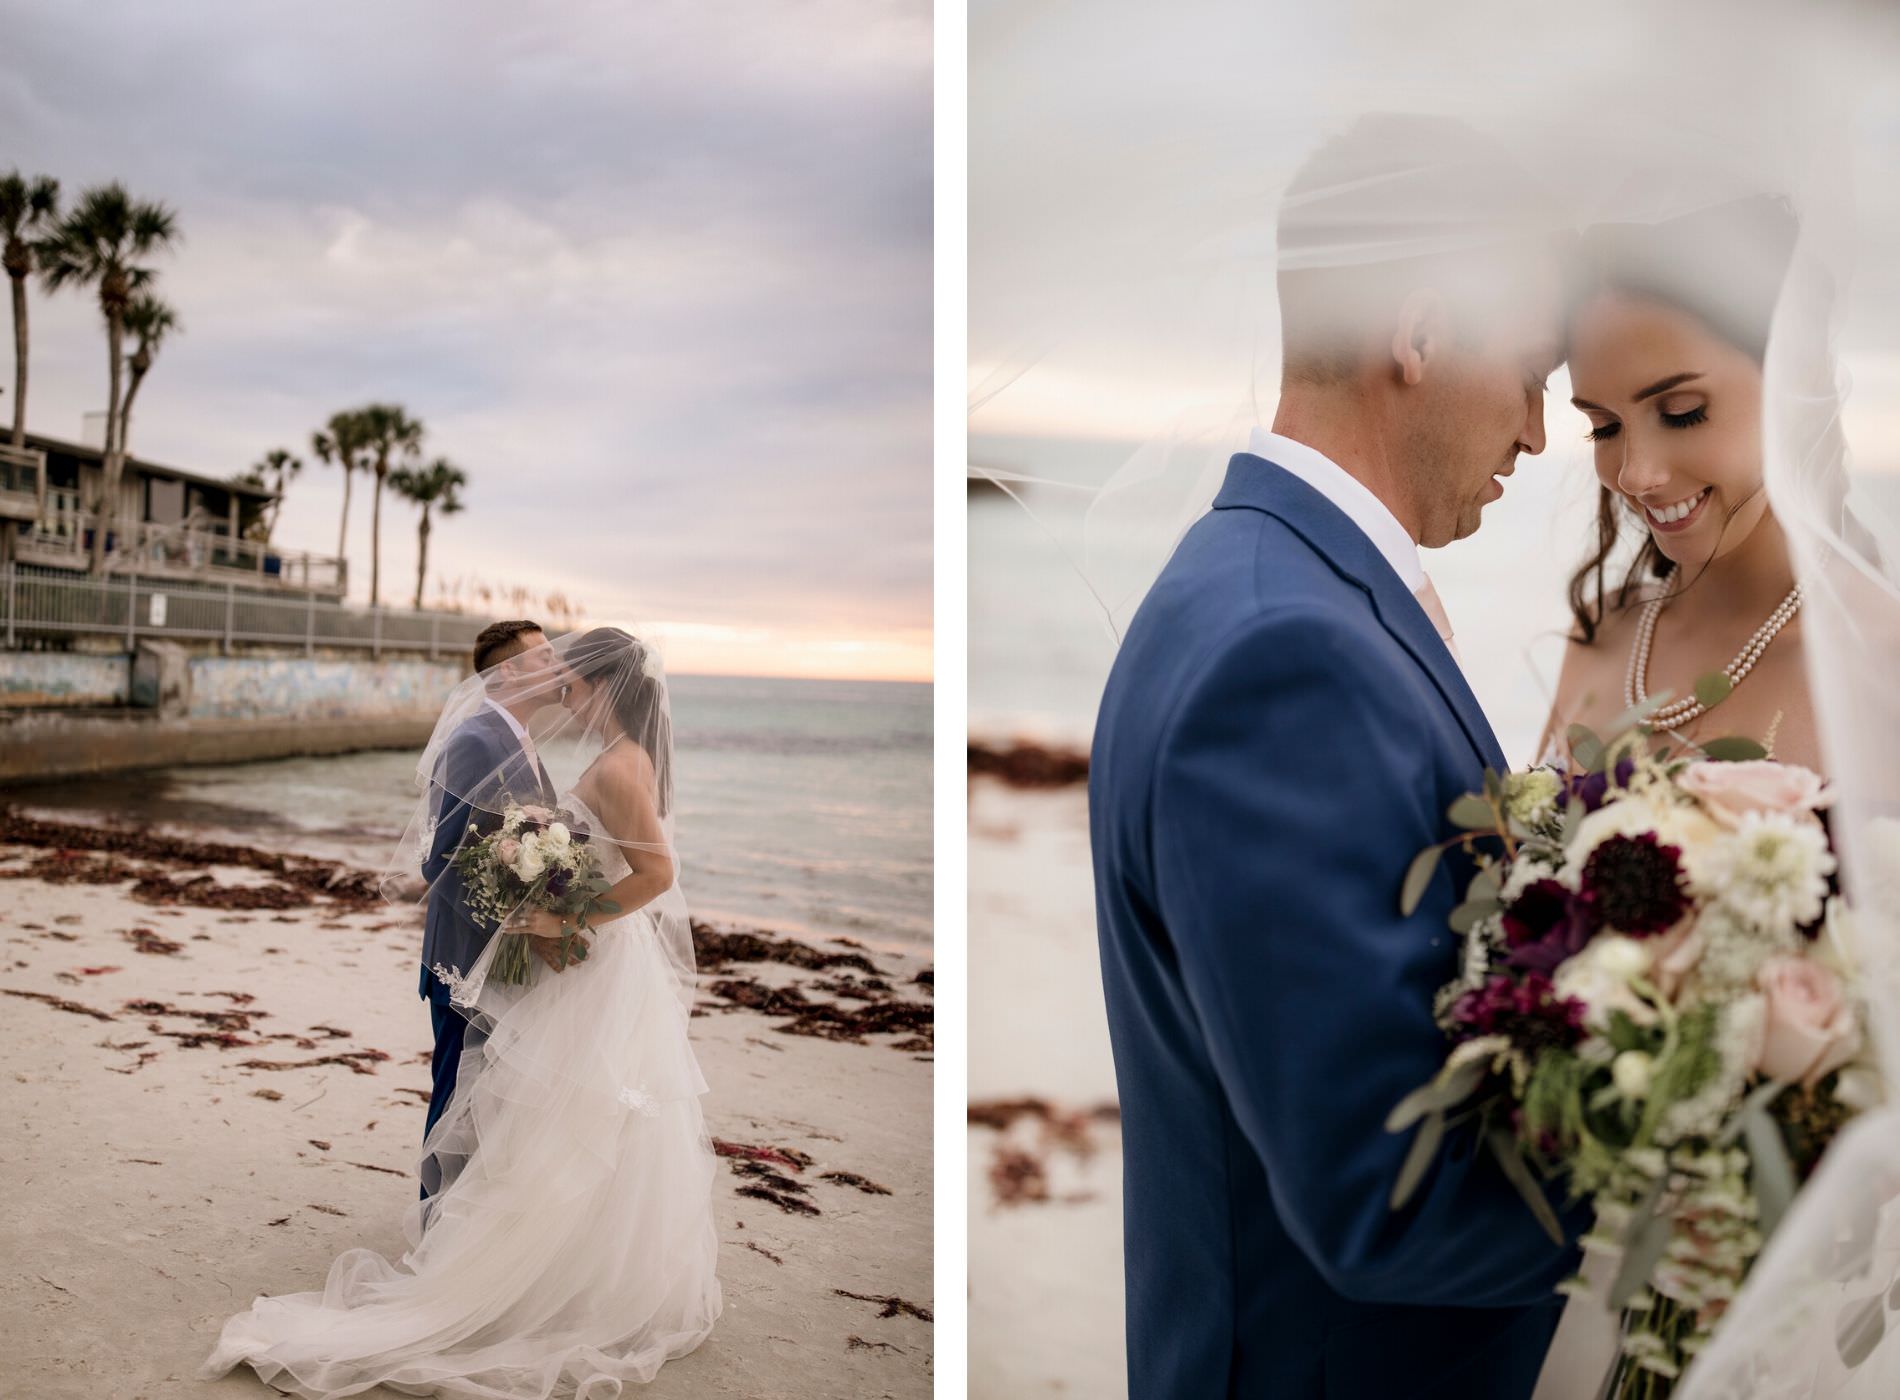 Bride and Groom Outdoor Beach Portrait | Bride and Groom Veil Shot | Dark Maroon and Blush Pink Bridal Bouquet